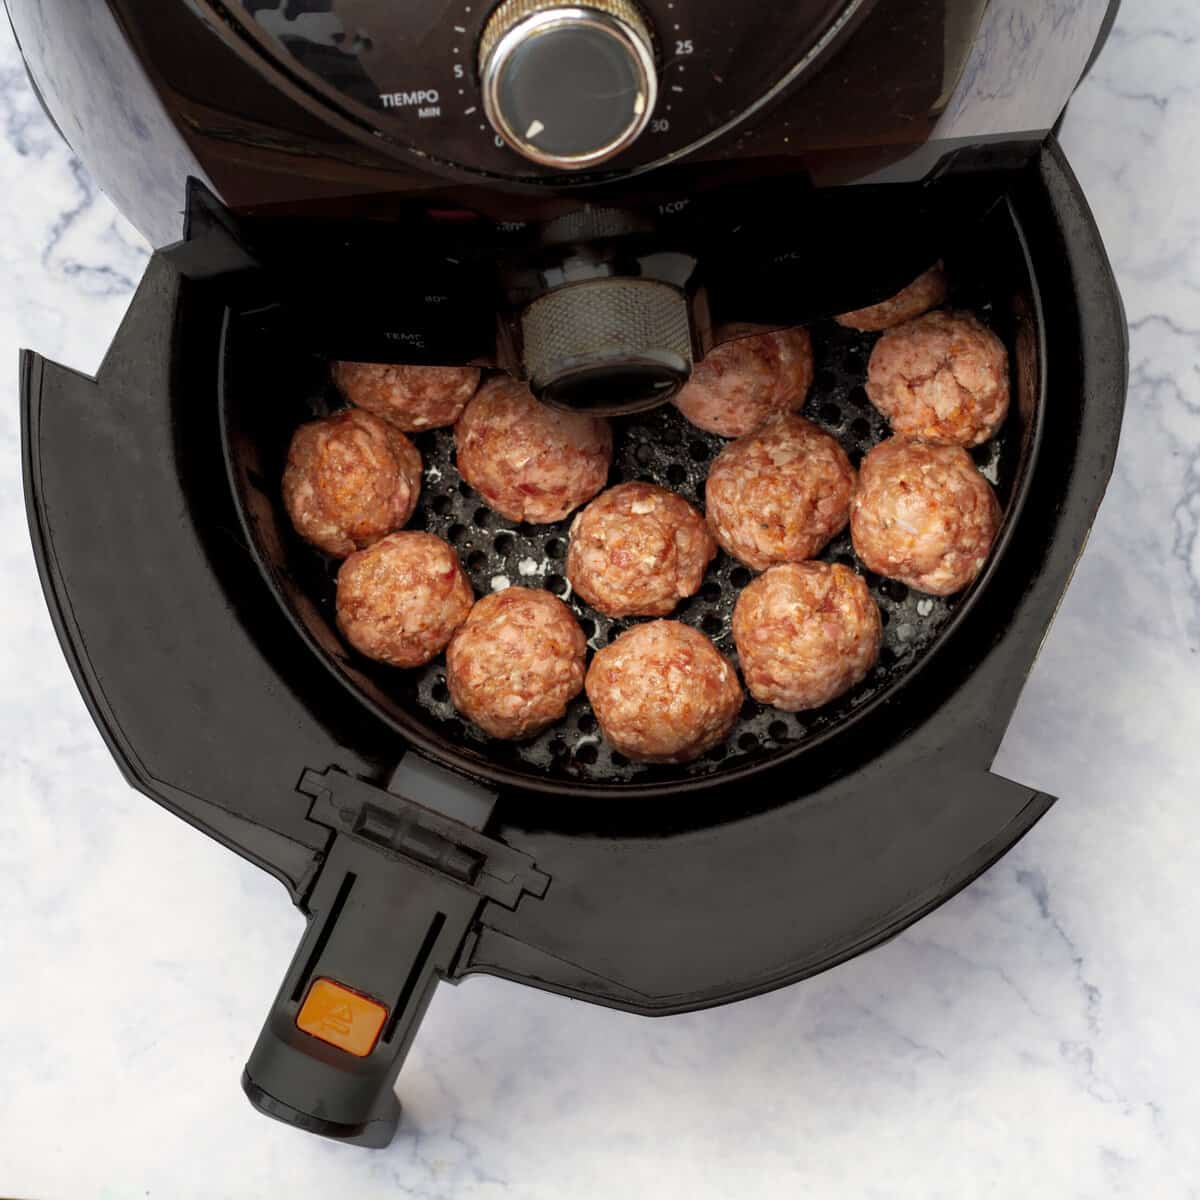 Small meatballs placed in a preheated air fryer basket